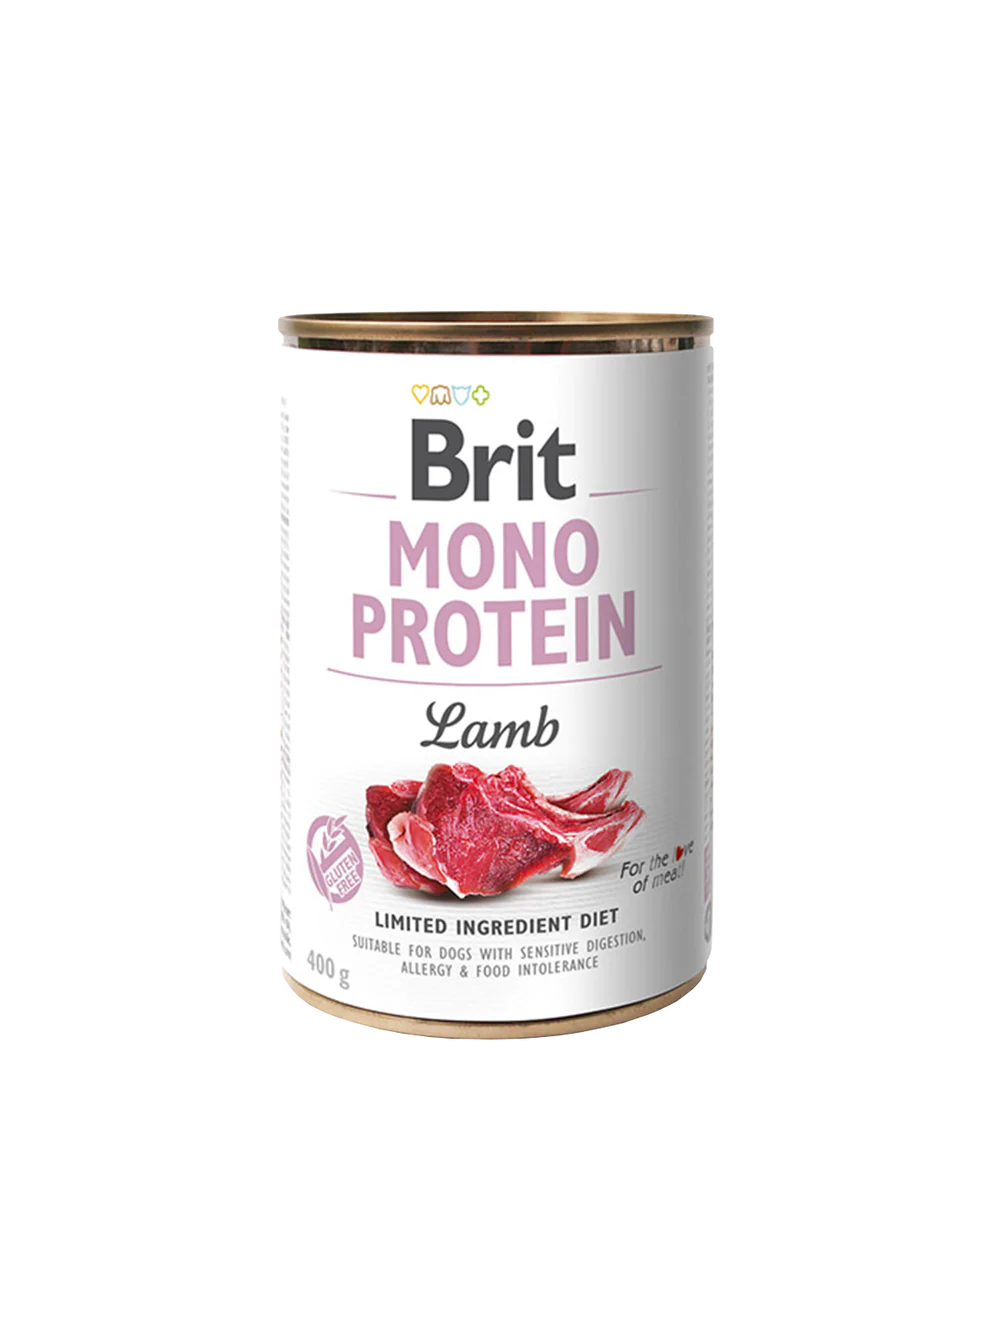 Brit Mono Protein Lamb 6 pack of 400g